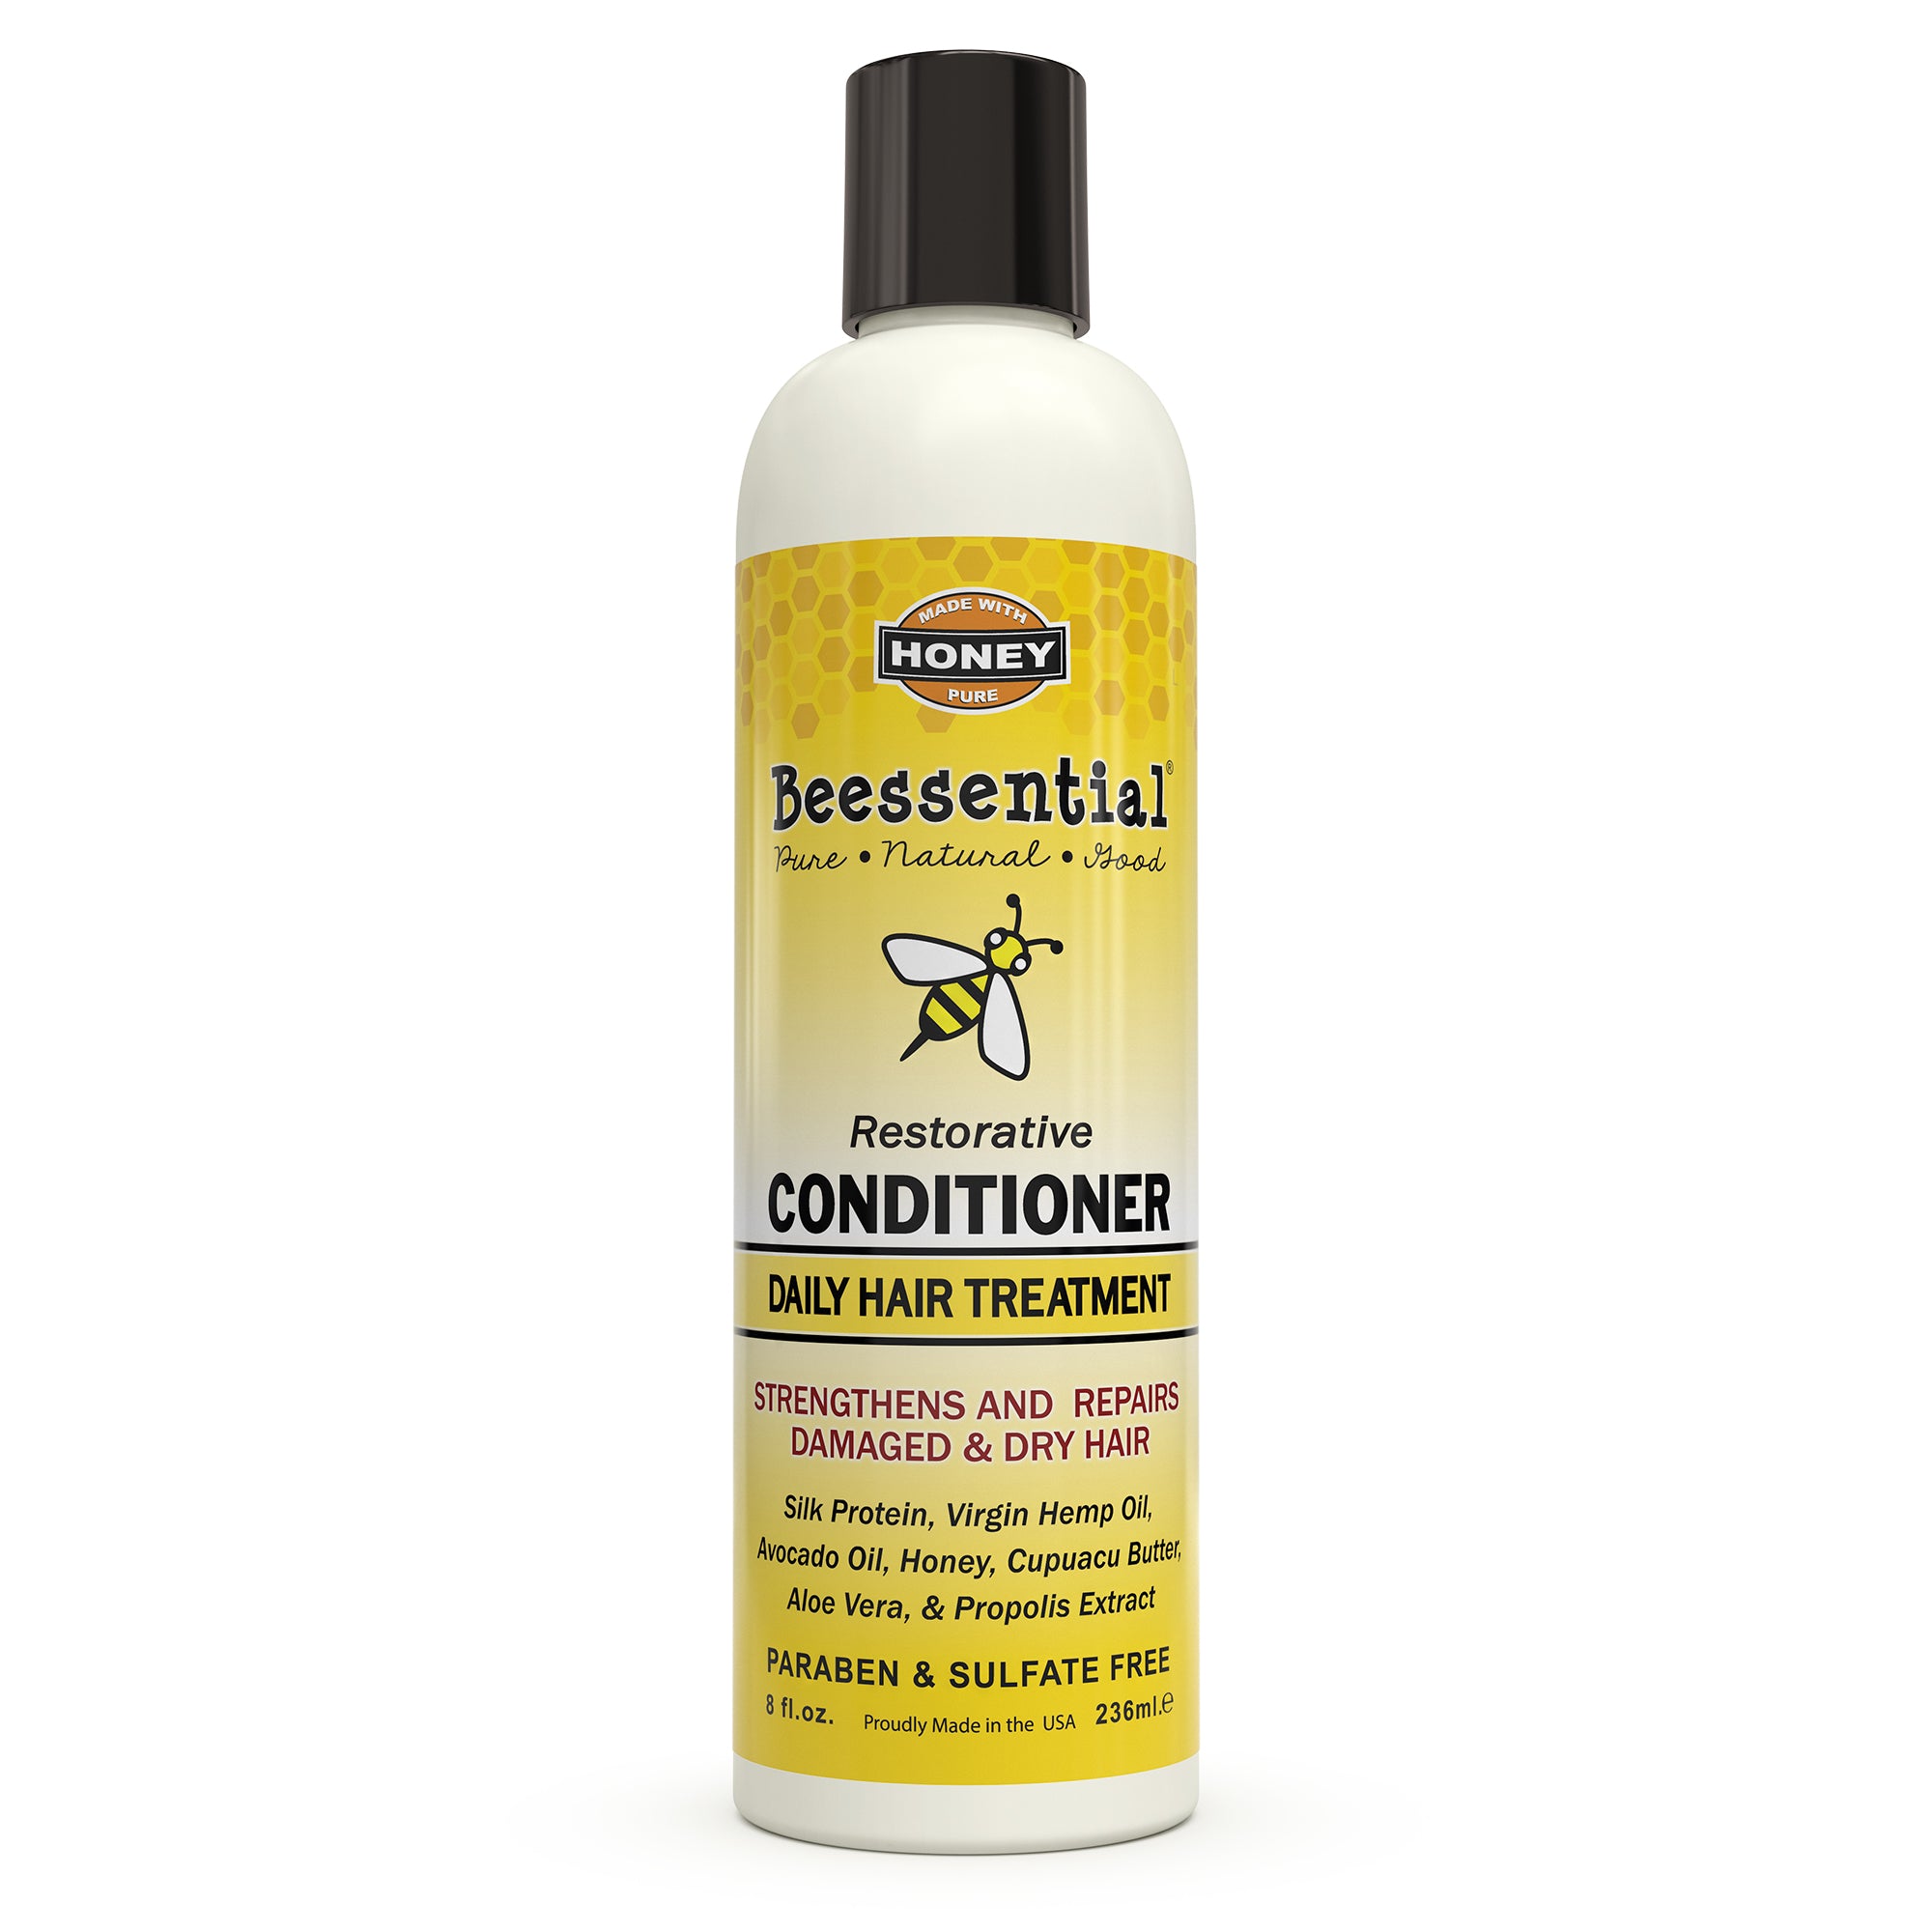 Beessential Honey Conditioner - Parabean and Sulfate Free